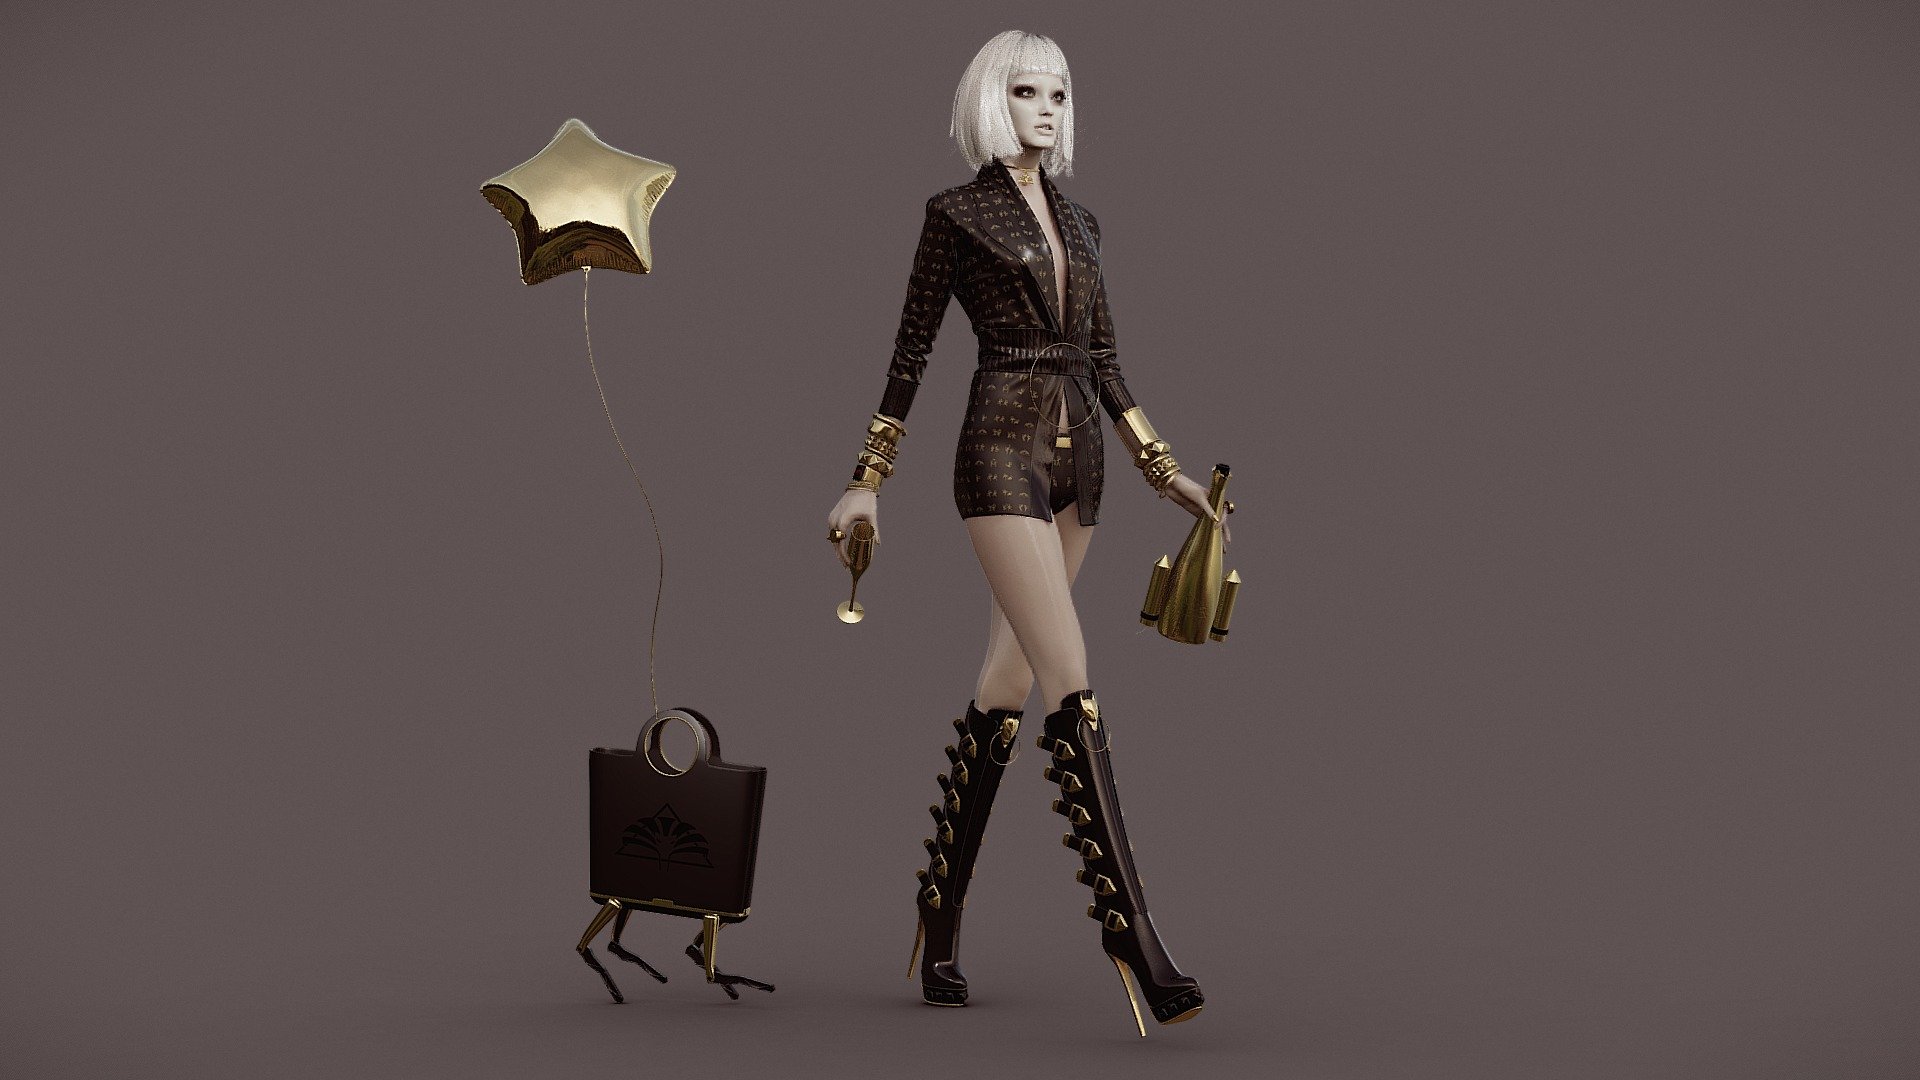 Luxury fashion character with designer clothes and an incredible amount of accessories. Perfect for fashion retail presentations and catwalk visualizations.
Character sculpted and optimized with ZBrush. Clothing design made with Marvelous Designer. Texturing is done with a Substance Painter.
Find out more about my projects at https://www.artstation.com/bartholomewkoziel/albums/all
Thanks for watching 3d model